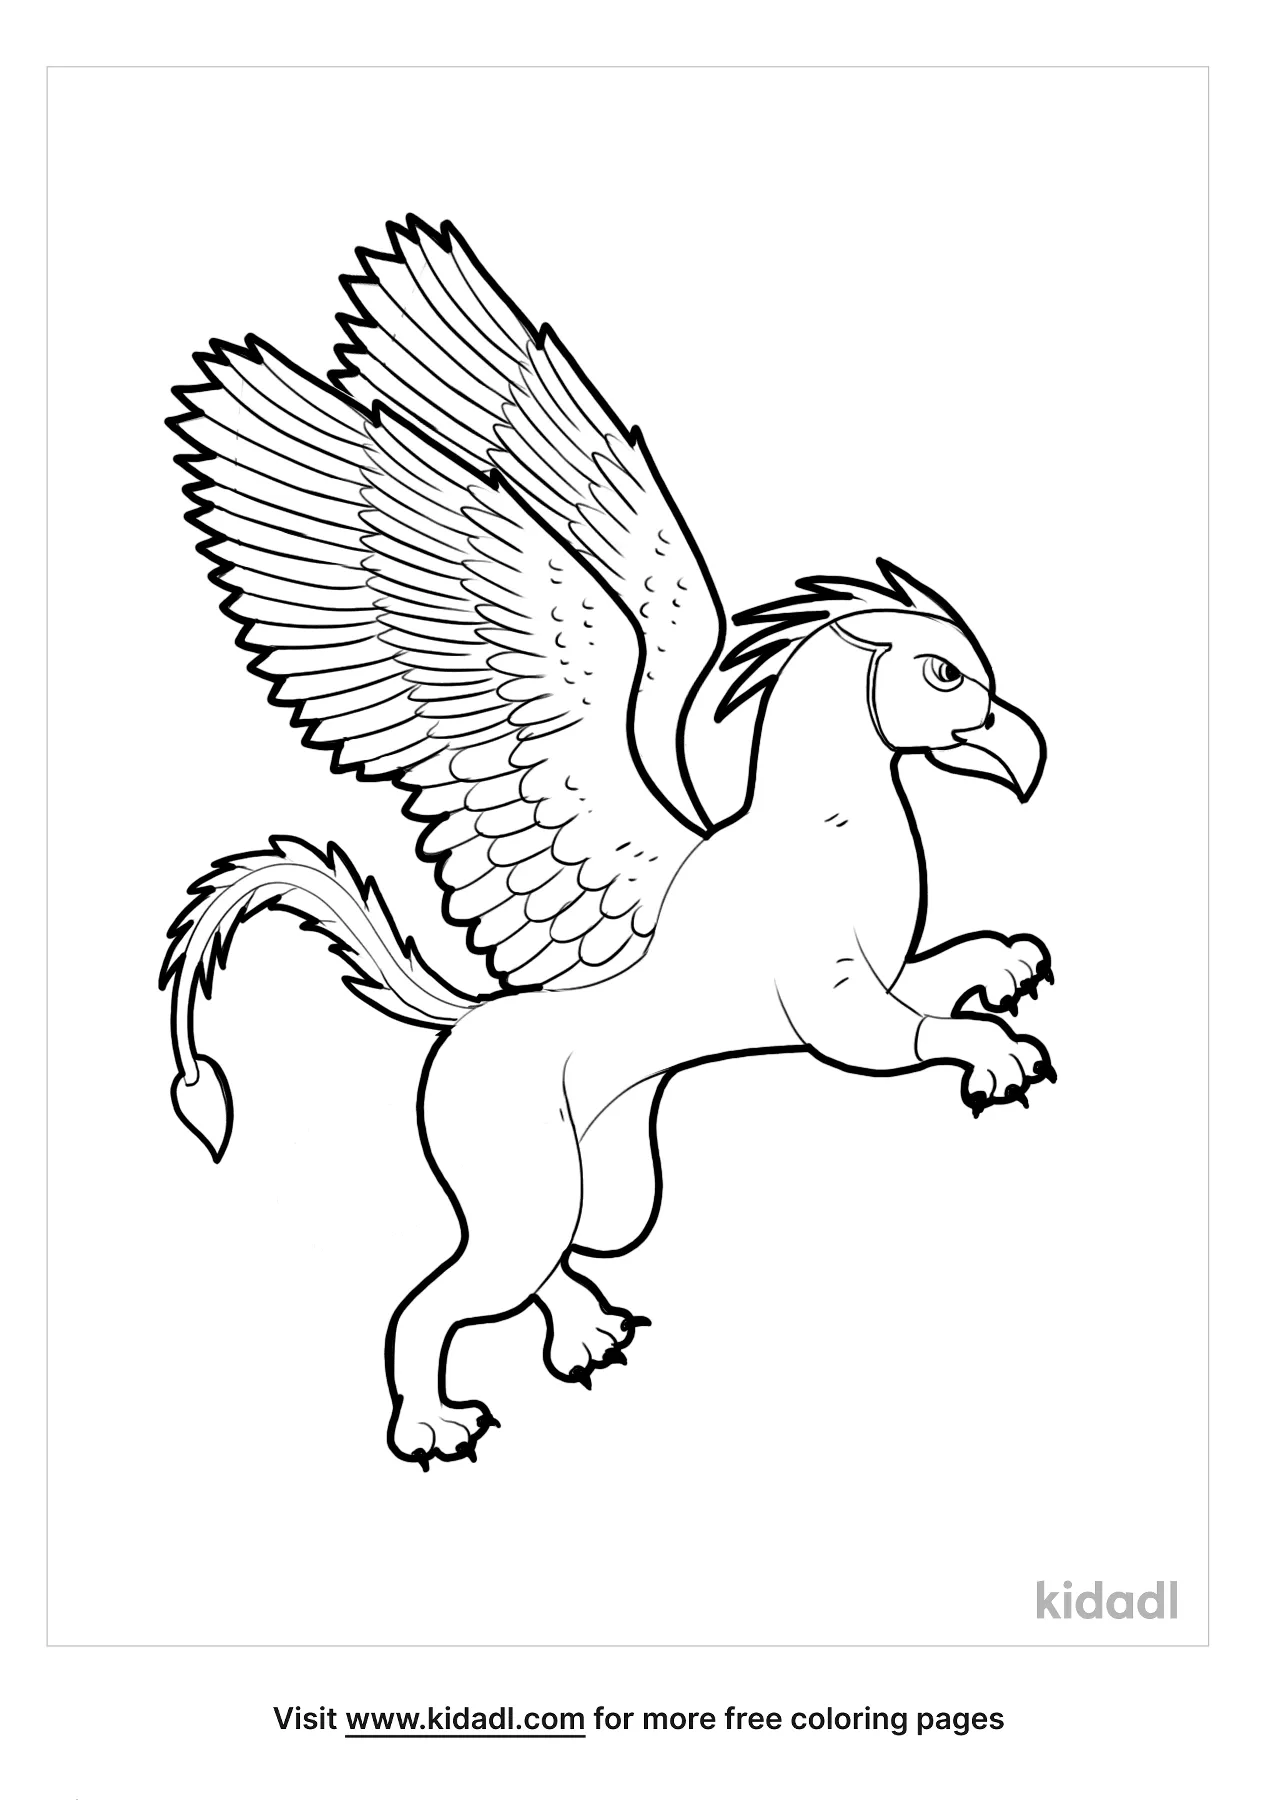 Griffin Coloring Pages Free Fairytales Stories Coloring Pages Kidadl